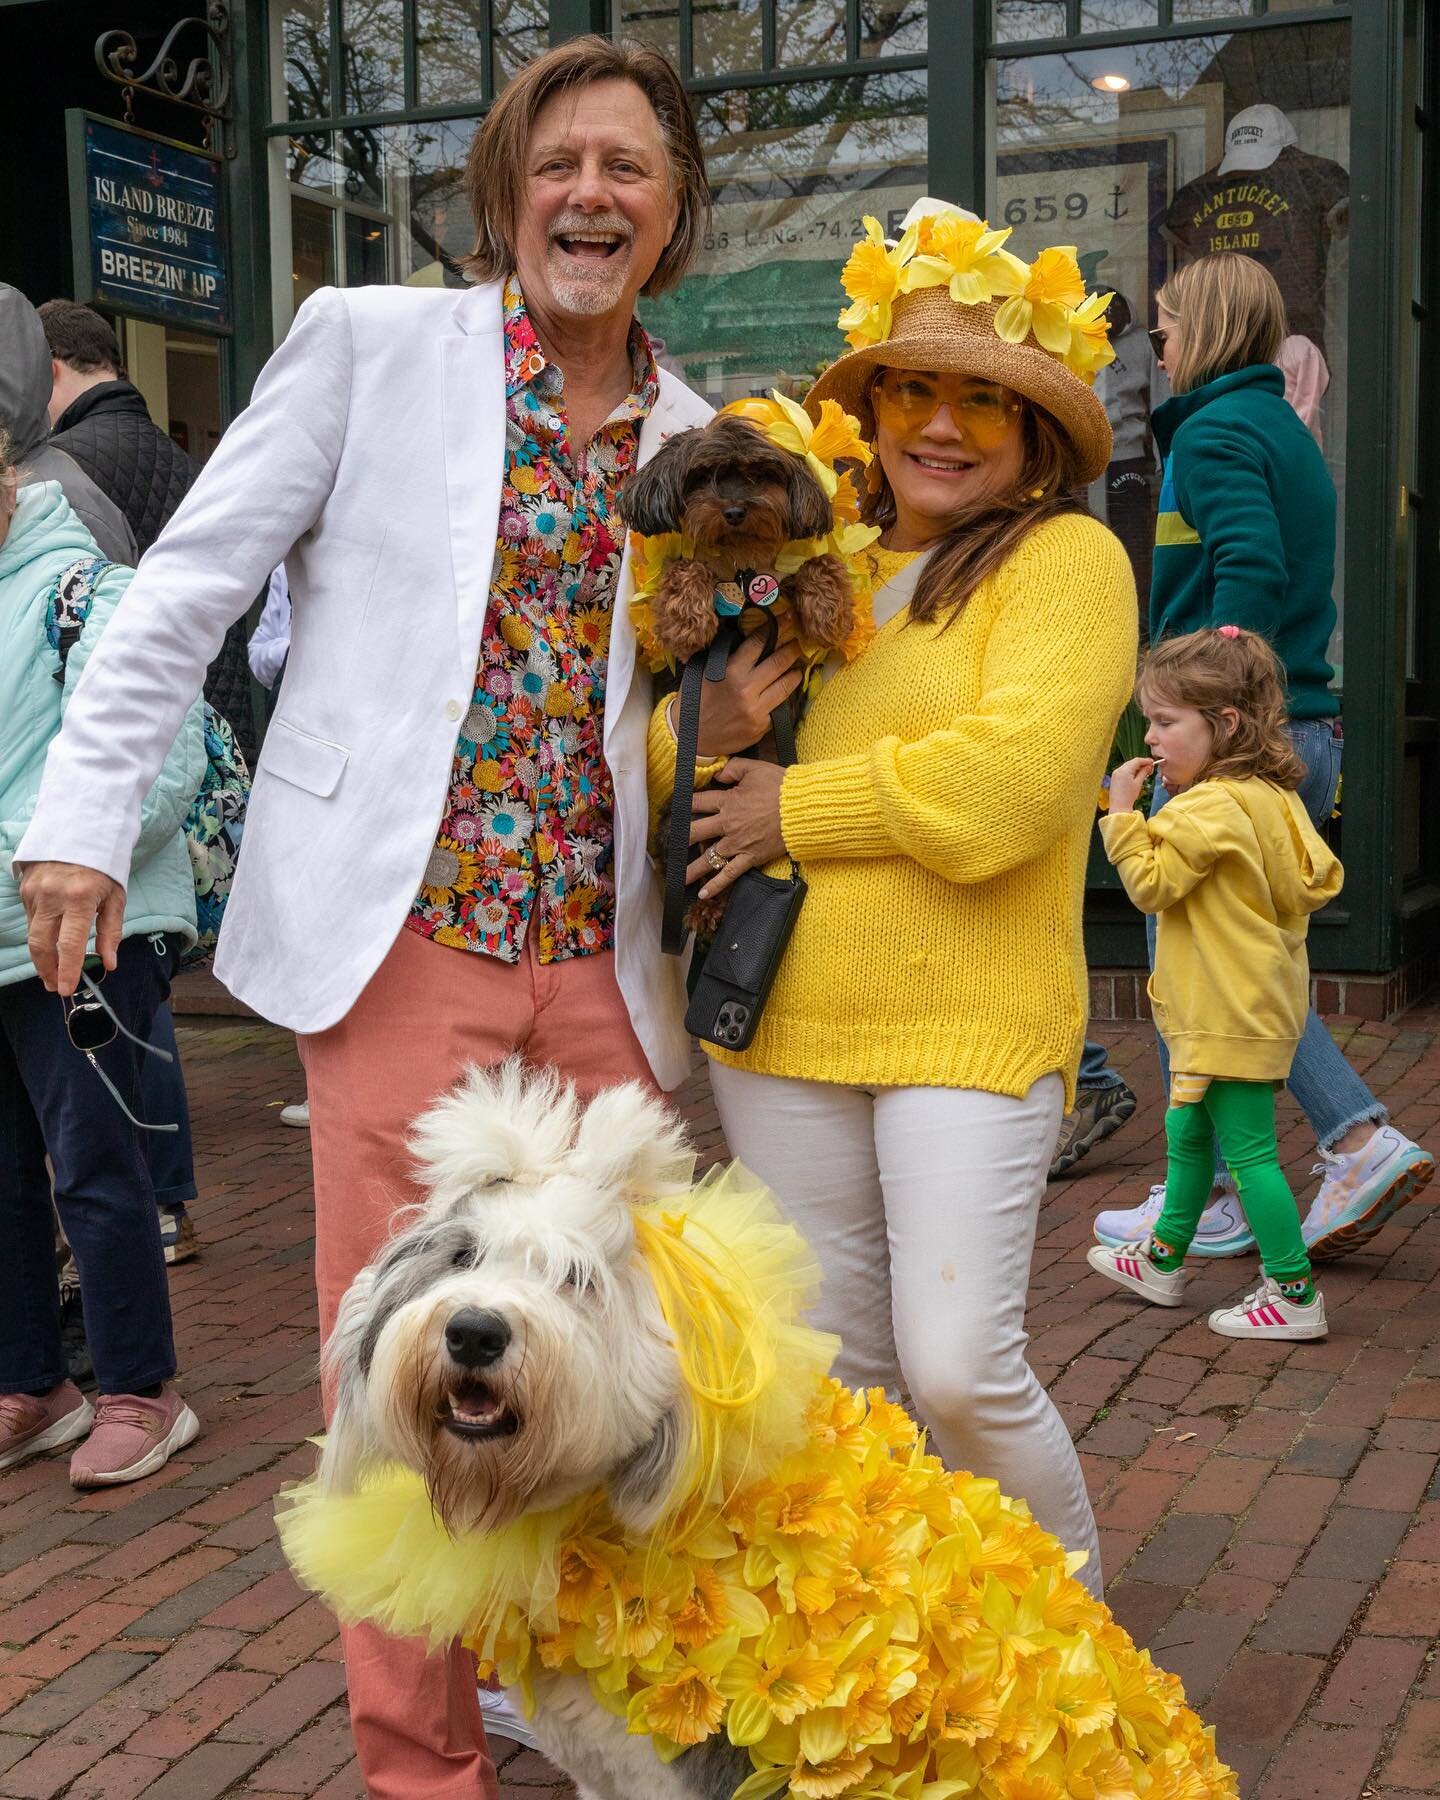 Still dreaming of #ACKDaffy 2023 🌼 The 47th Annual Nantucket Daffodil Festival took place here on island this past weekend and it was a great one. The festivities kicked off Friday afternoon and continued through Sunday, highlighted by the @ackchamb